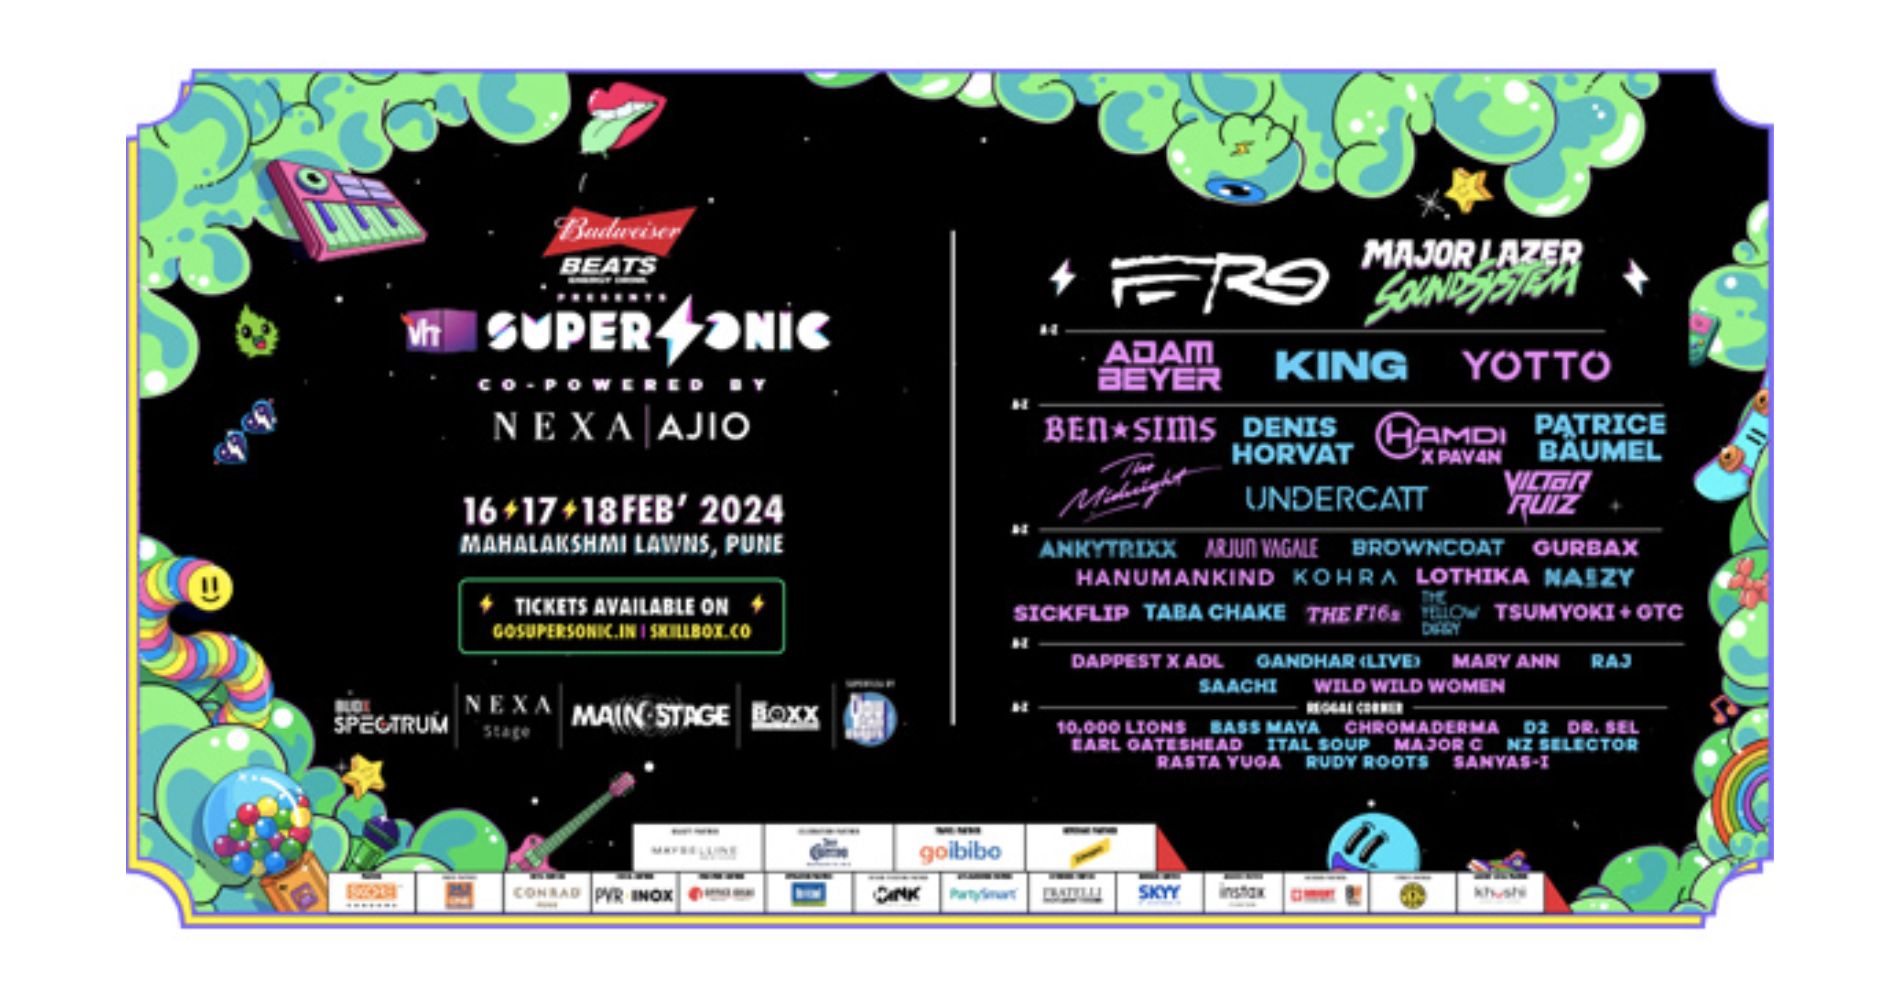 Vh1 Supersonic 2024 Introduces Stellar Lineup Of Debuting Artists To Watch